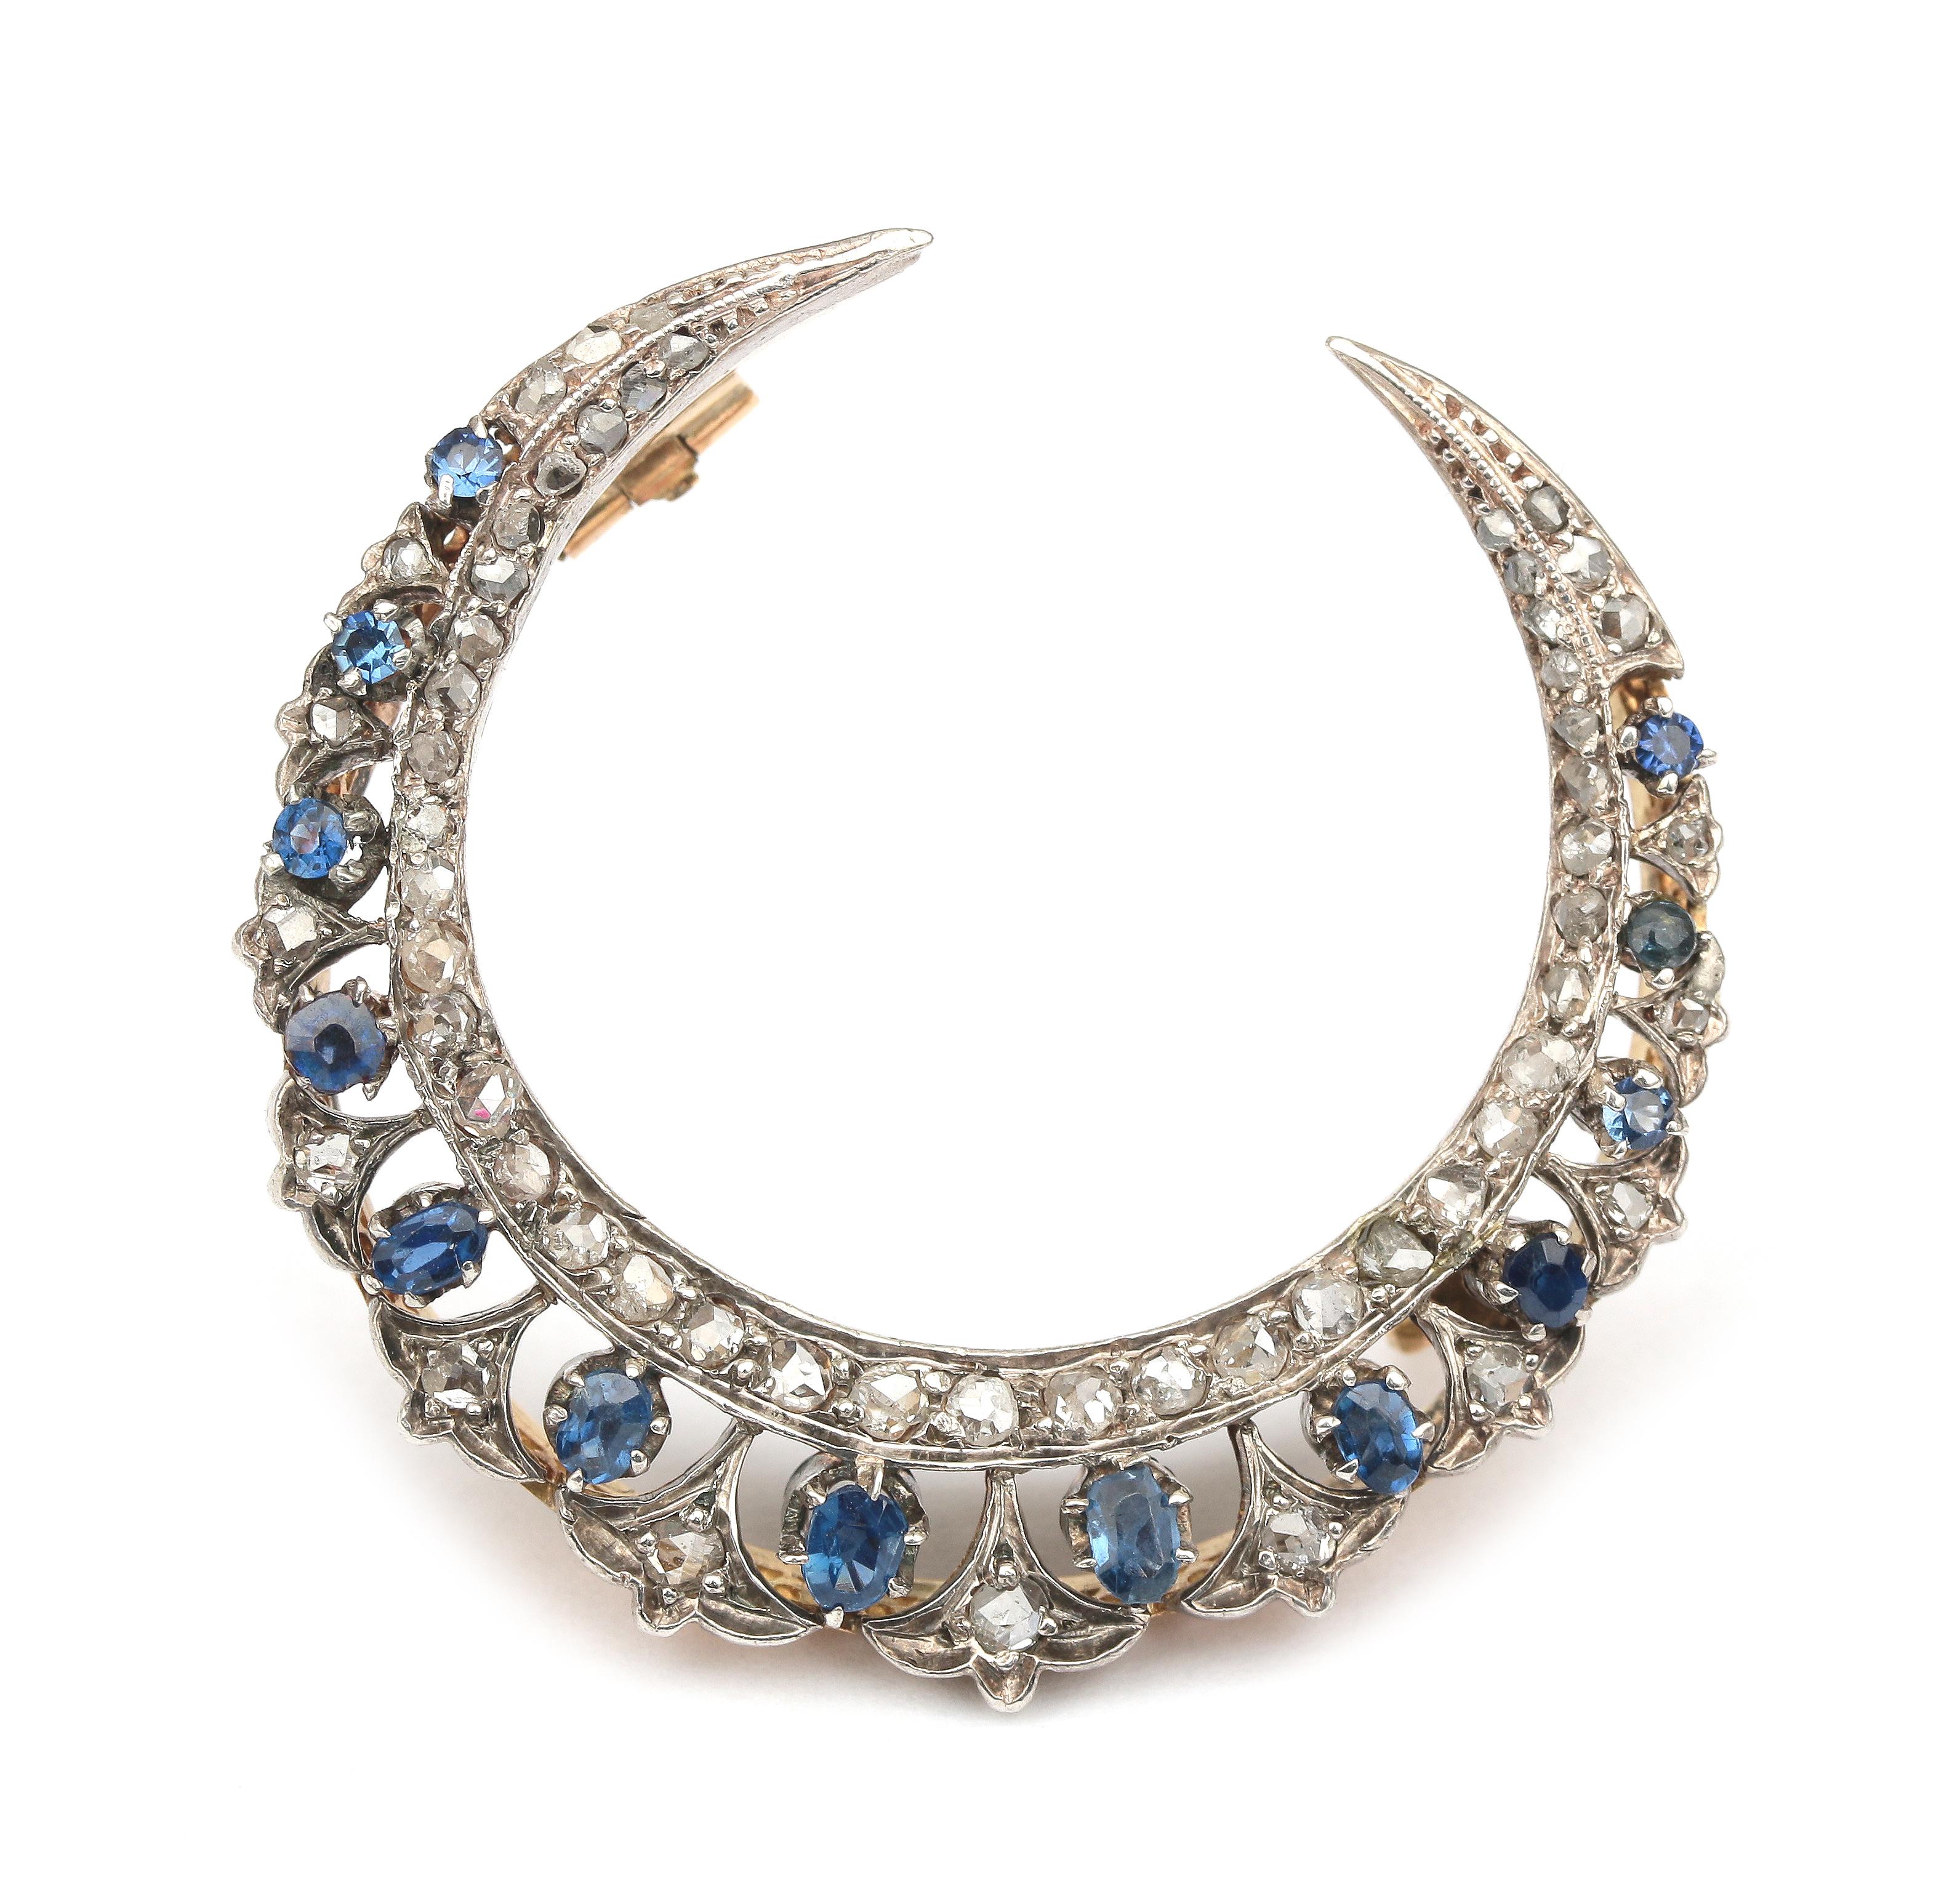 A 14 karat gold and silver sapphire and diamond crescent brooch - Image 4 of 4